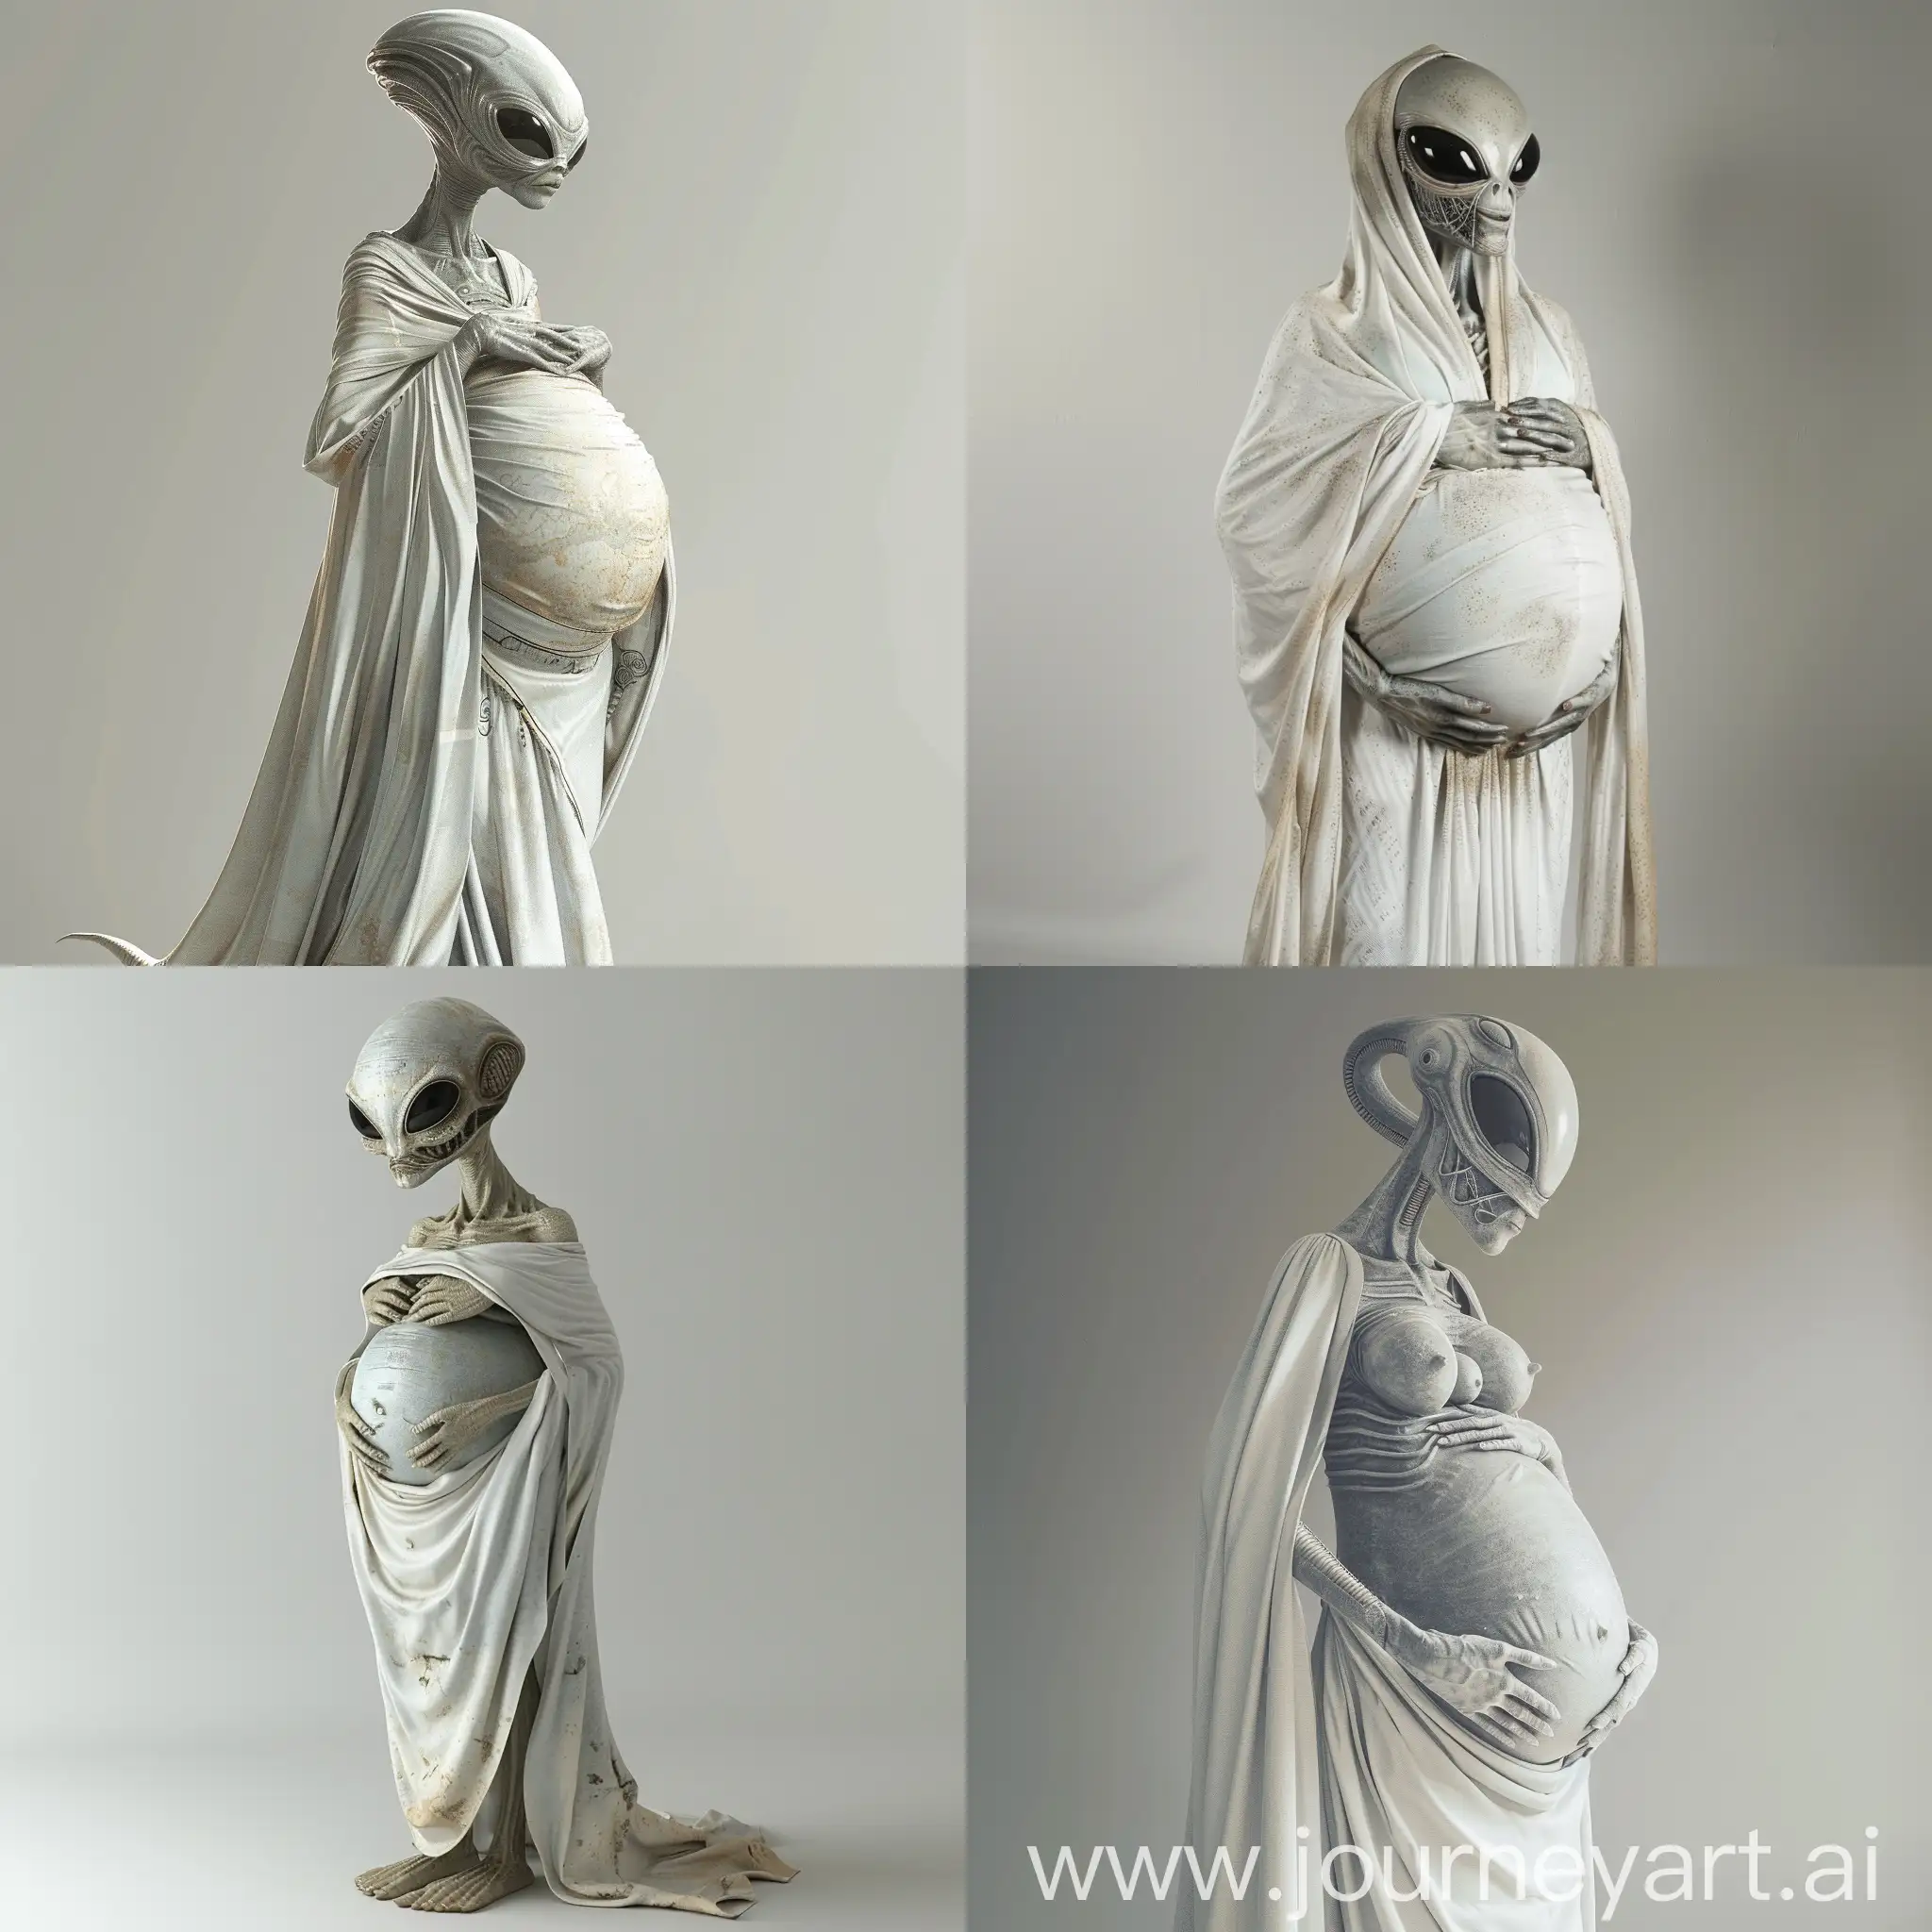 Pregnant-Gray-Alien-in-Elegant-White-Toga-Expecting-Twins